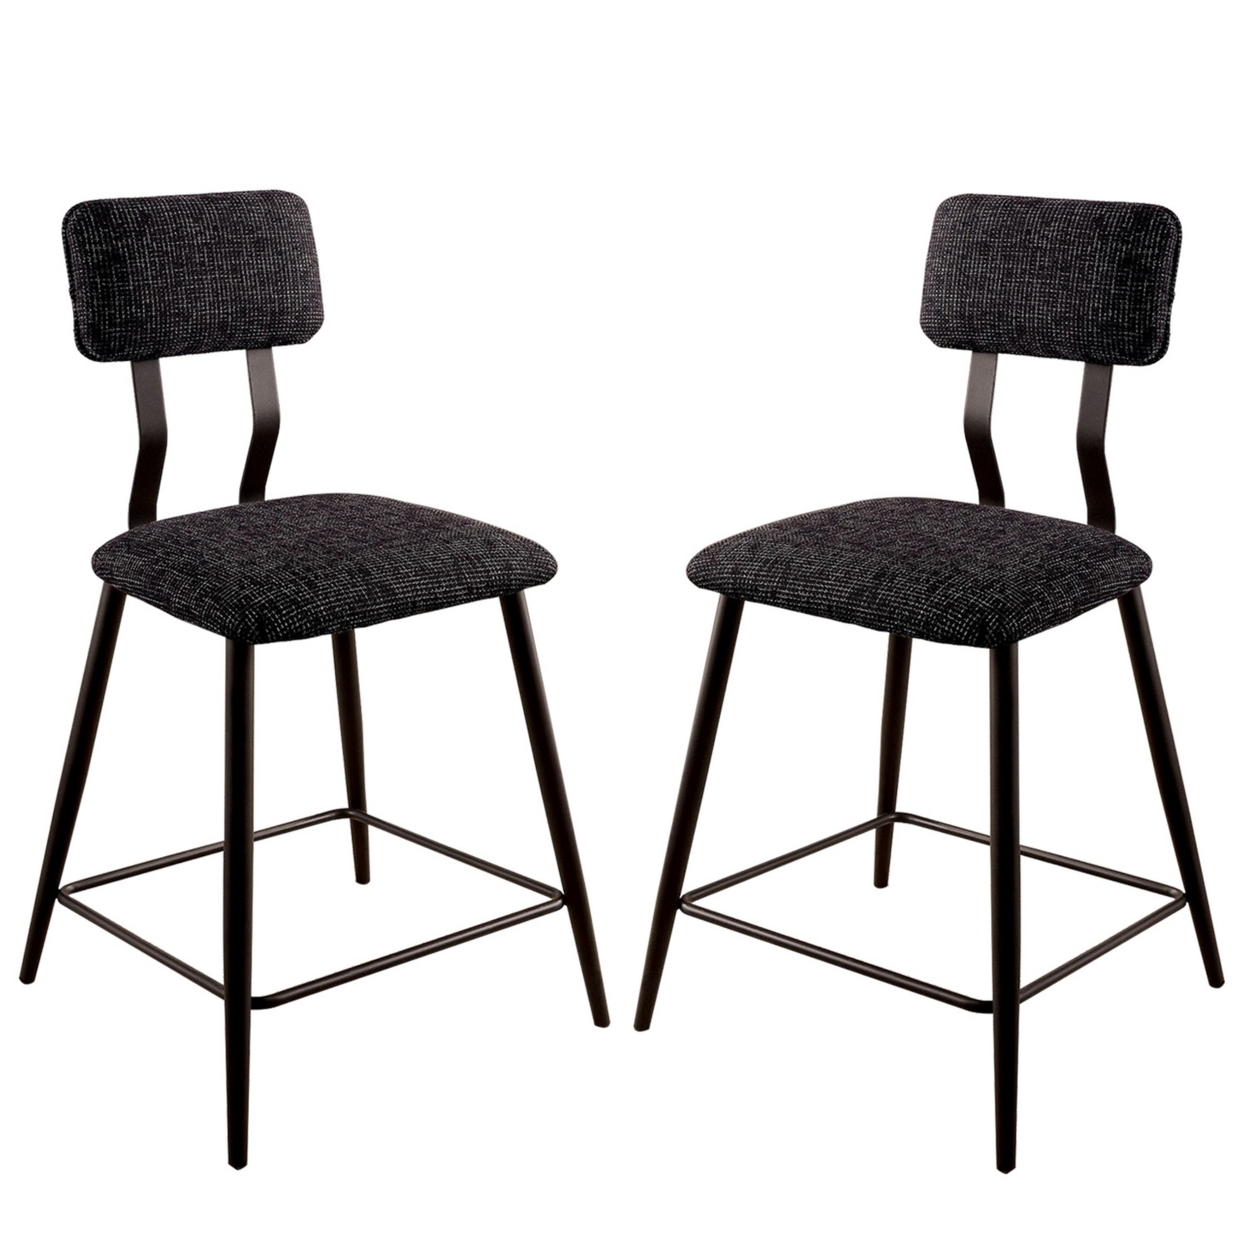 Fabric Counter Height Chairs With Angled Metal Legs, Set Of 2, Black- Saltoro Sherpi